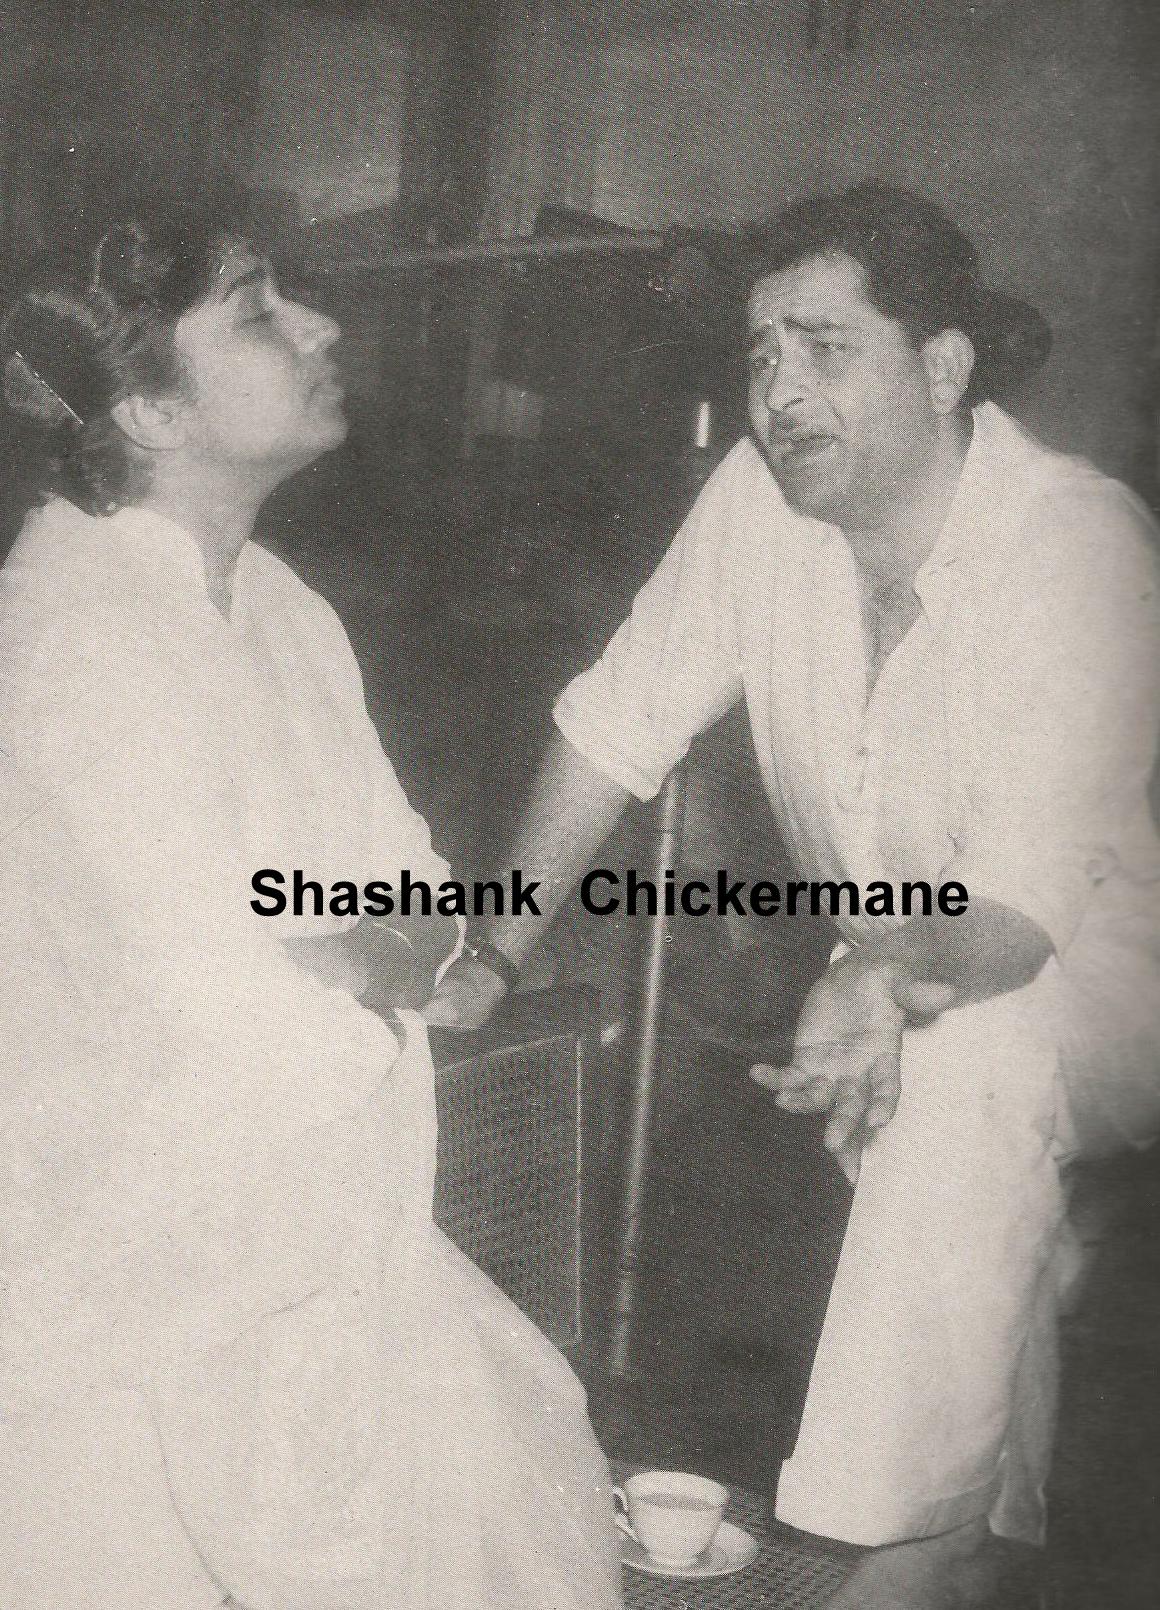 Lata with Raj Kapoor rehearsaling a song in the studio